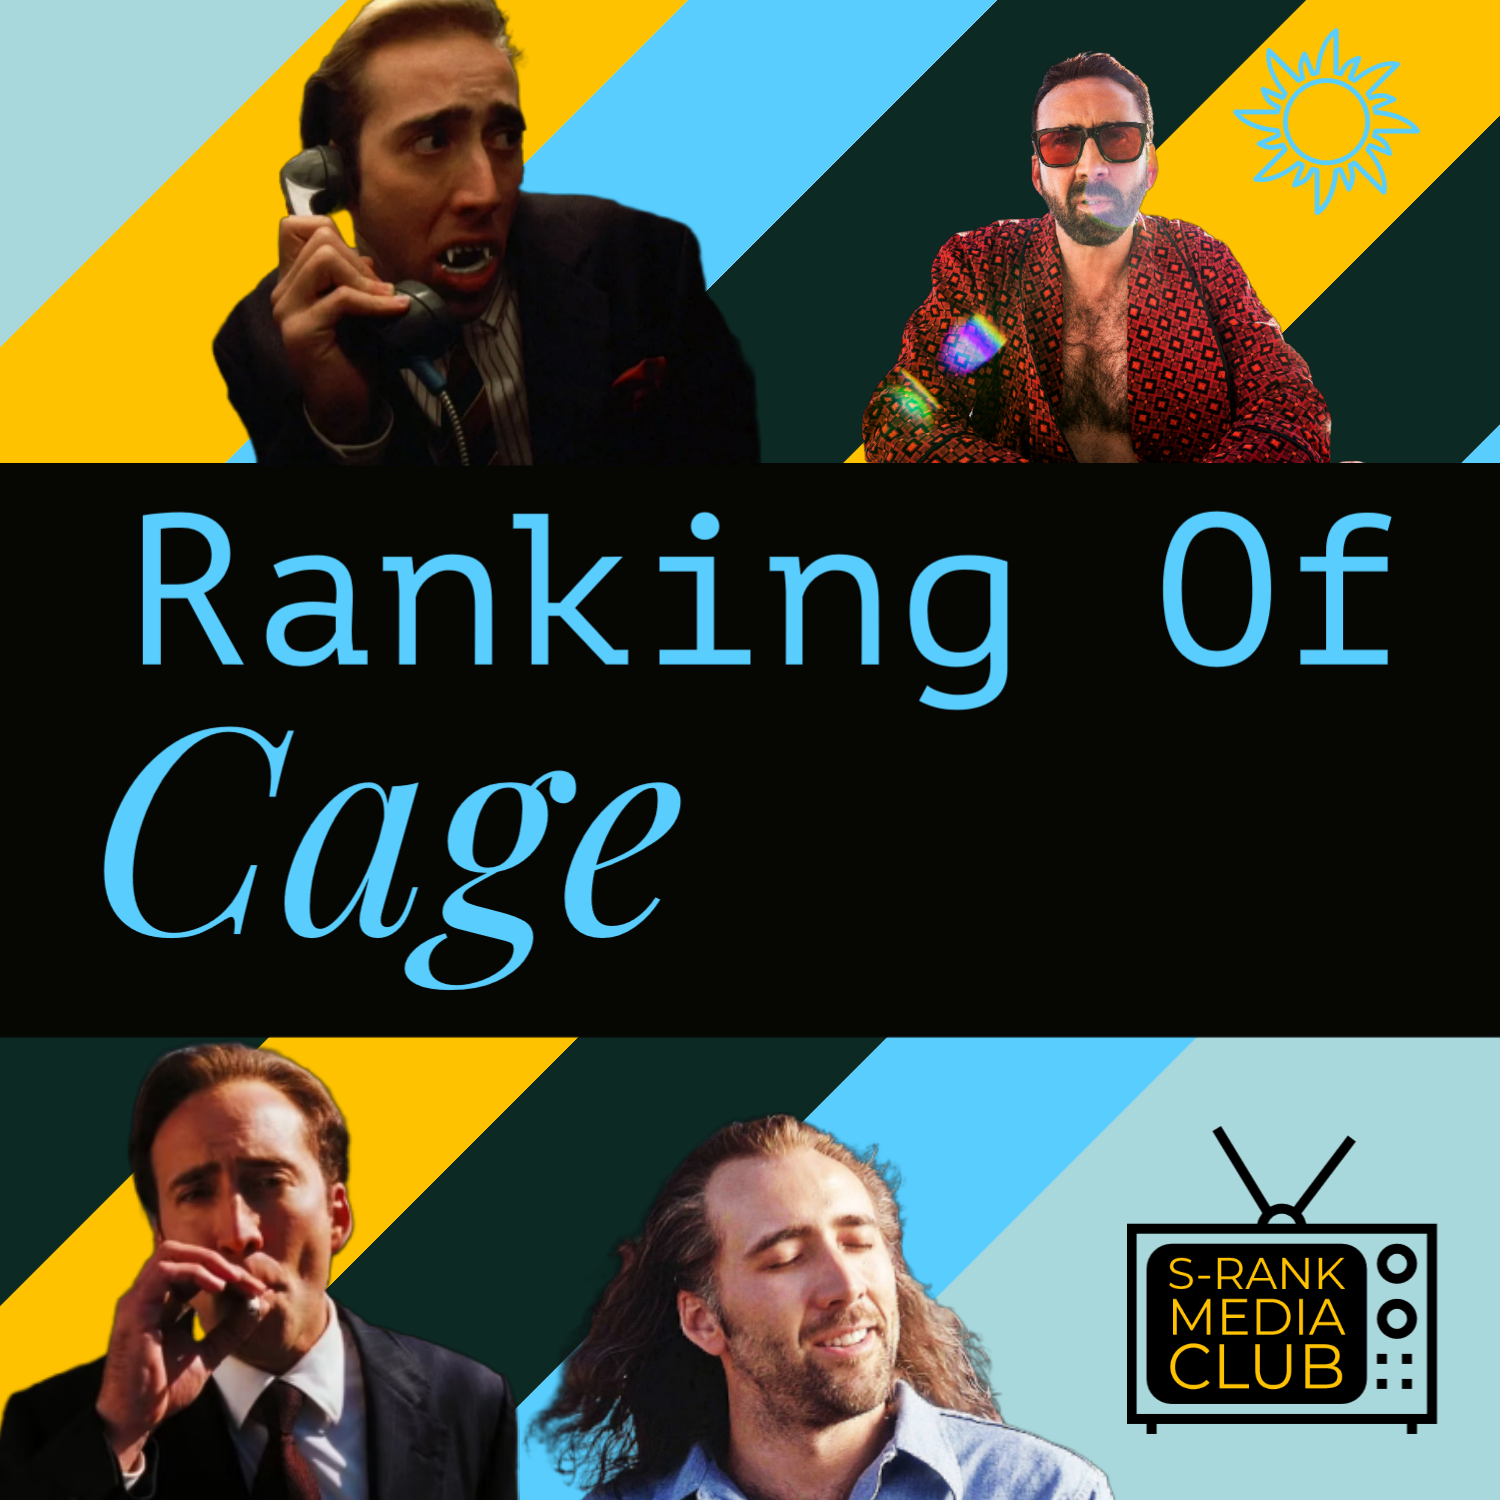 Artwork for podcast Ranking Of Cage